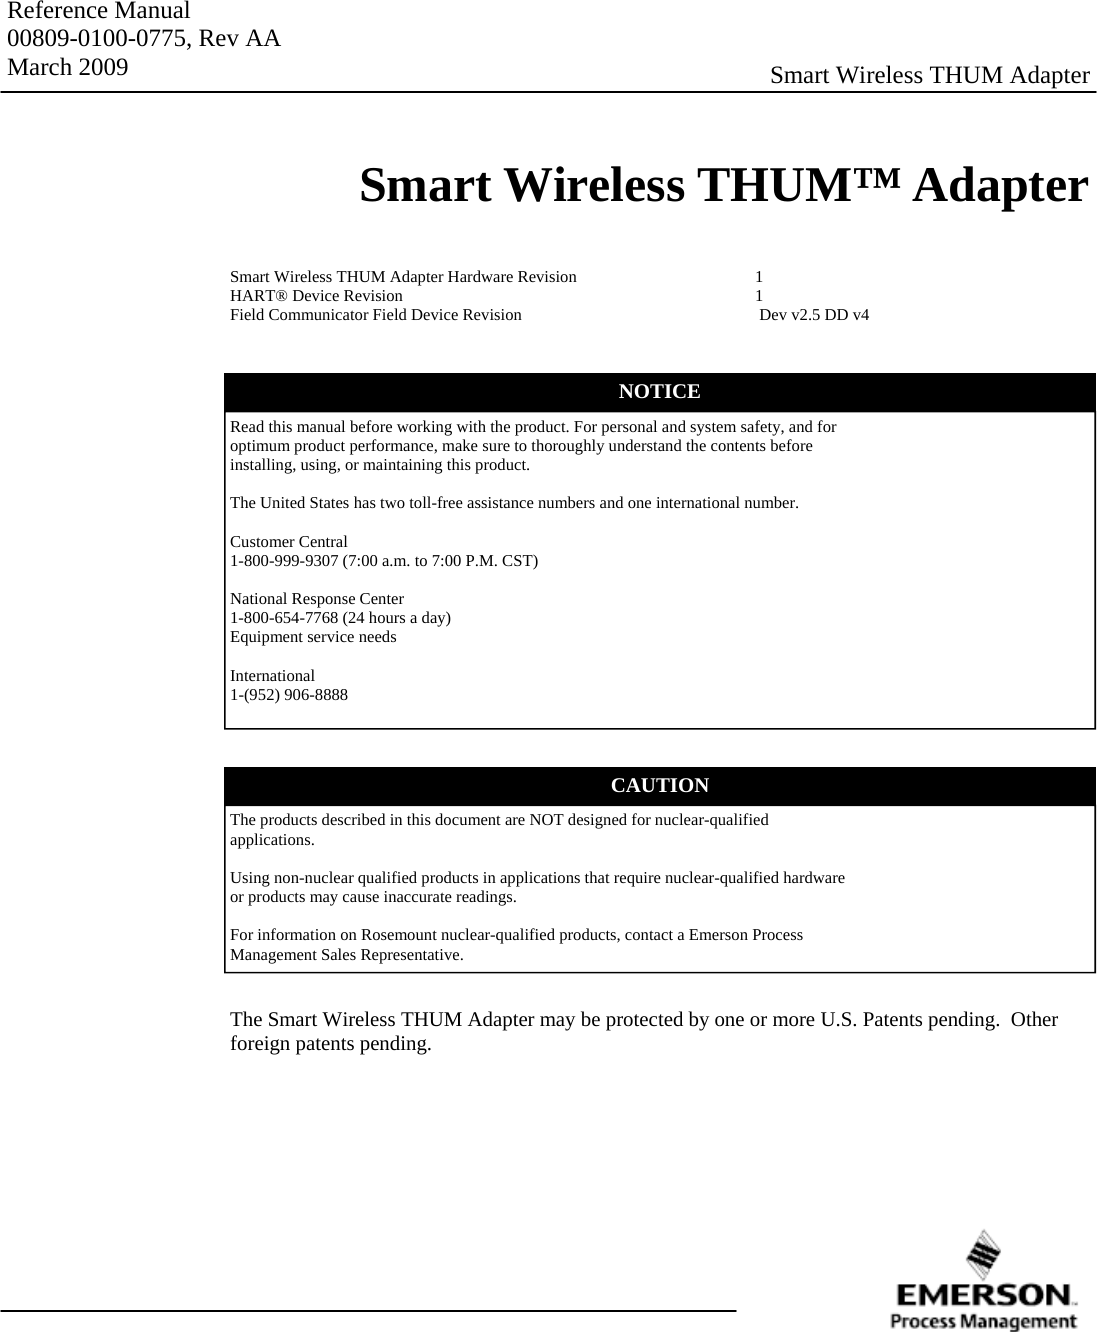 Reference Manual 00809-0100-0775, Rev AA March 2009 Smart Wireless THUM™ Adapter Smart Wireless THUM Adapter Smart Wireless THUM Adapter Hardware Revision      1 HART® Device Revision     1 Field Communicator Field Device Revision         Dev v2.5 DD v4 Read this manual before working with the product. For personal and system safety, and for optimum product performance, make sure to thoroughly understand the contents before installing, using, or maintaining this product.  The United States has two toll-free assistance numbers and one international number.  Customer Central 1-800-999-9307 (7:00 a.m. to 7:00 P.M. CST)  National Response Center 1-800-654-7768 (24 hours a day) Equipment service needs  International 1-(952) 906-8888 NOTICE CAUTION The products described in this document are NOT designed for nuclear-qualified applications.  Using non-nuclear qualified products in applications that require nuclear-qualified hardware or products may cause inaccurate readings.  For information on Rosemount nuclear-qualified products, contact a Emerson Process Management Sales Representative. The Smart Wireless THUM Adapter may be protected by one or more U.S. Patents pending.  Other foreign patents pending. 